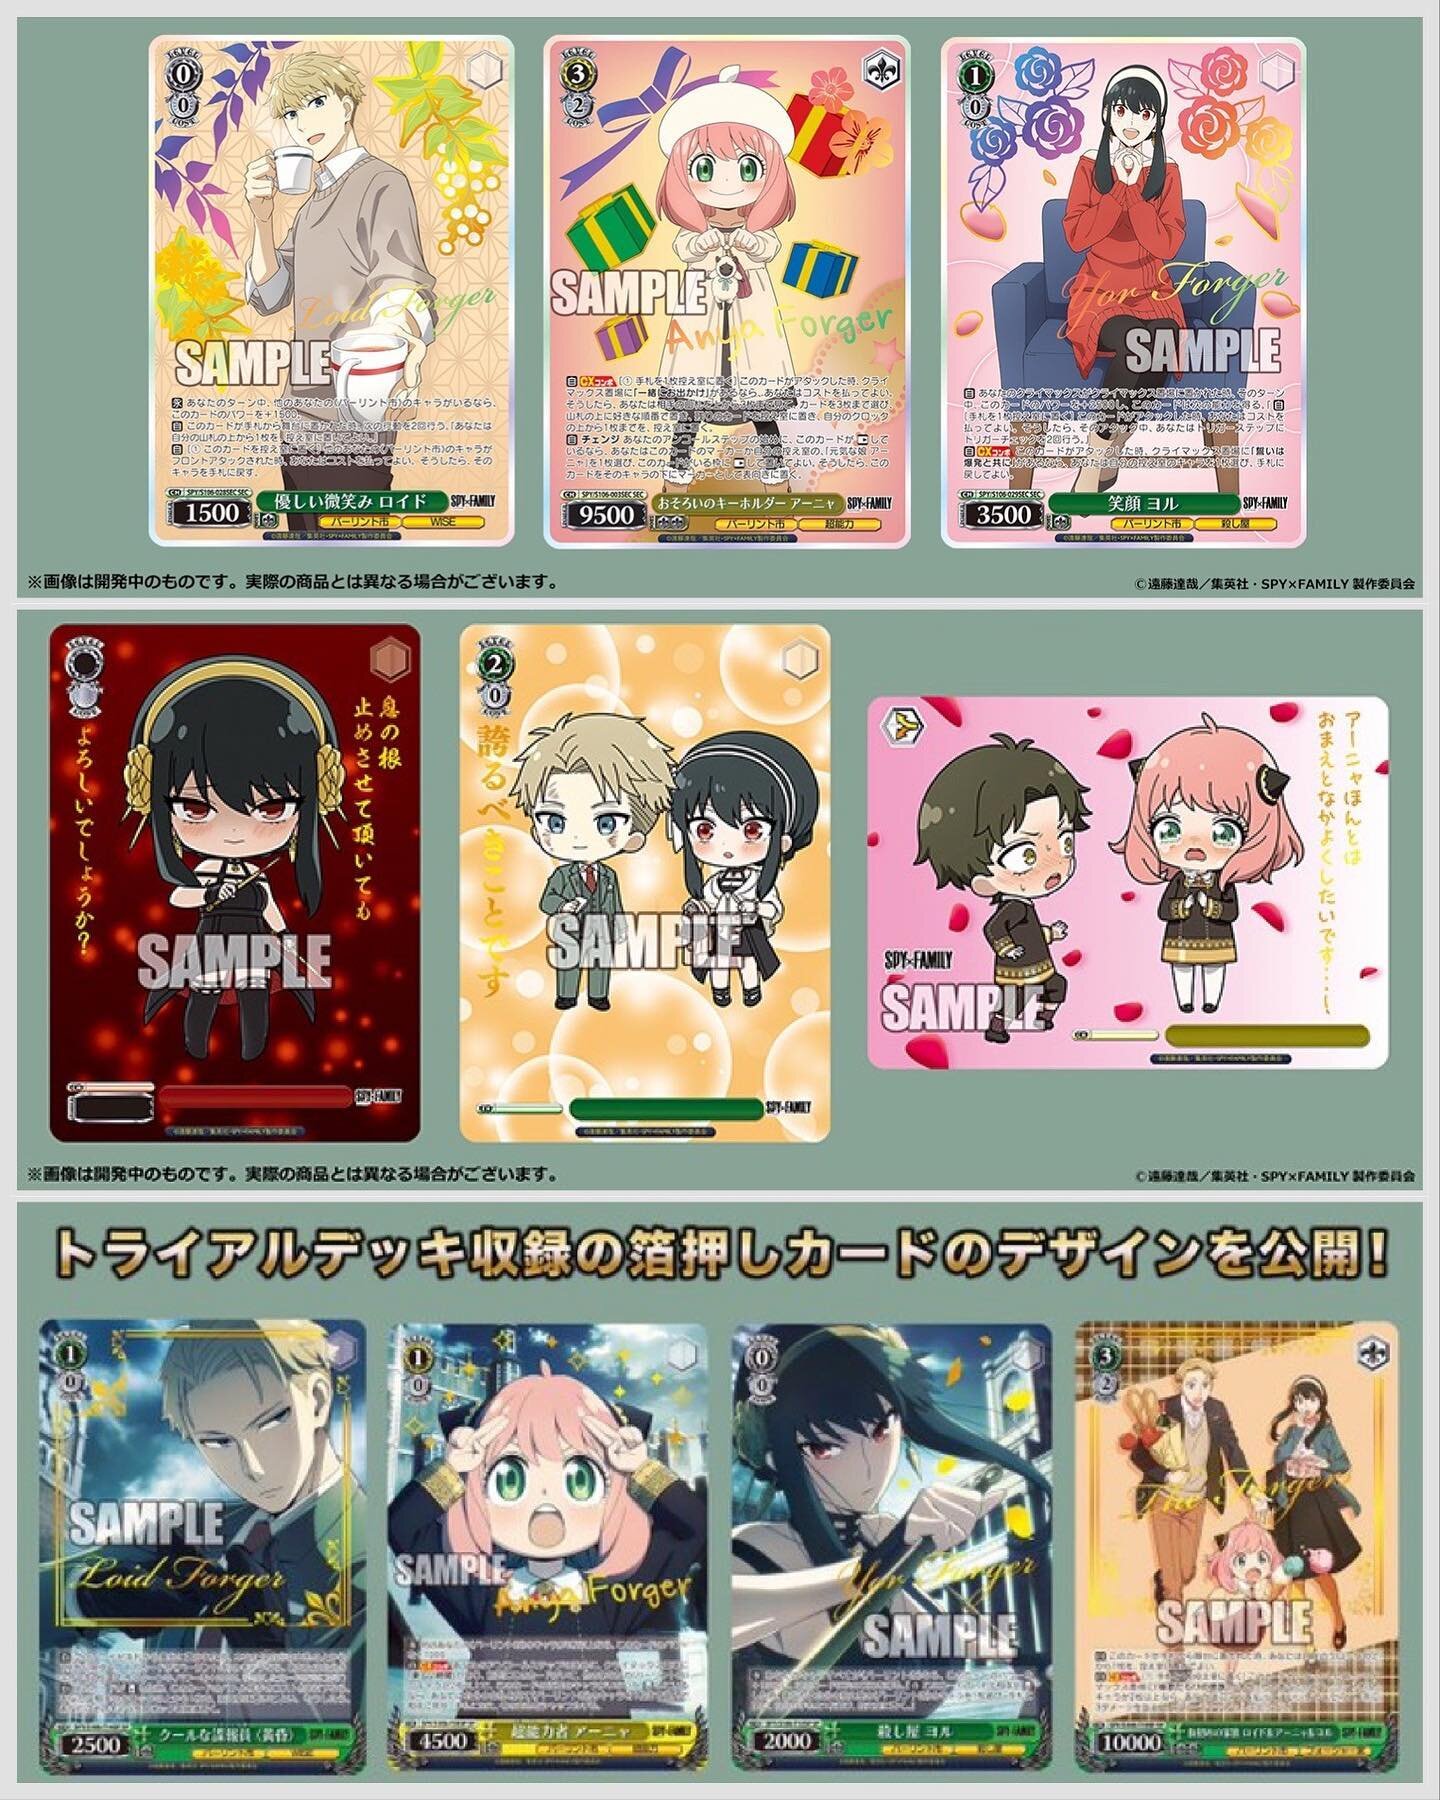 The inserts for the upcoming Weiss Schwarz Spy x Family sets look beautiful 😍 

But wondering why no Signatures 😞 

#weissschwarz #spyxfamily #spyxfamilymanga #spyxfamilyanime #spyxfamilyanya #spyxfamilyyor #spyxfamilyloid #spyxfamilybond #anyaforg